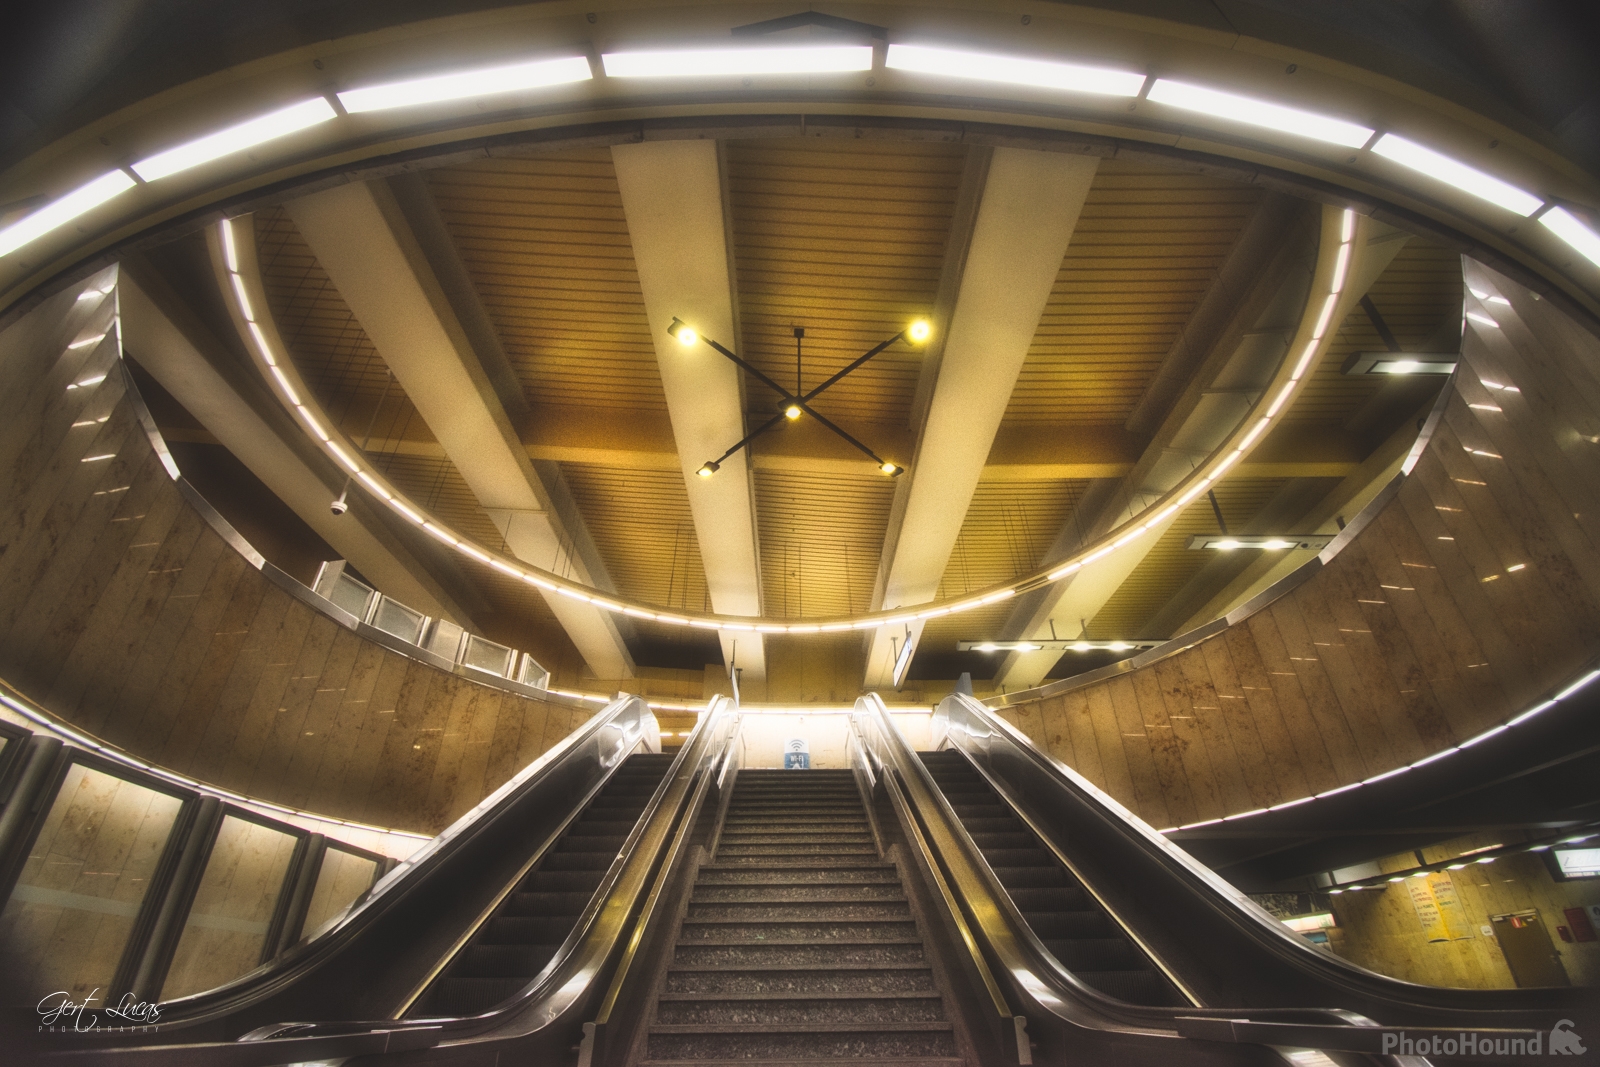 Image of Aumale Subwaystation, Brussels by Gert Lucas